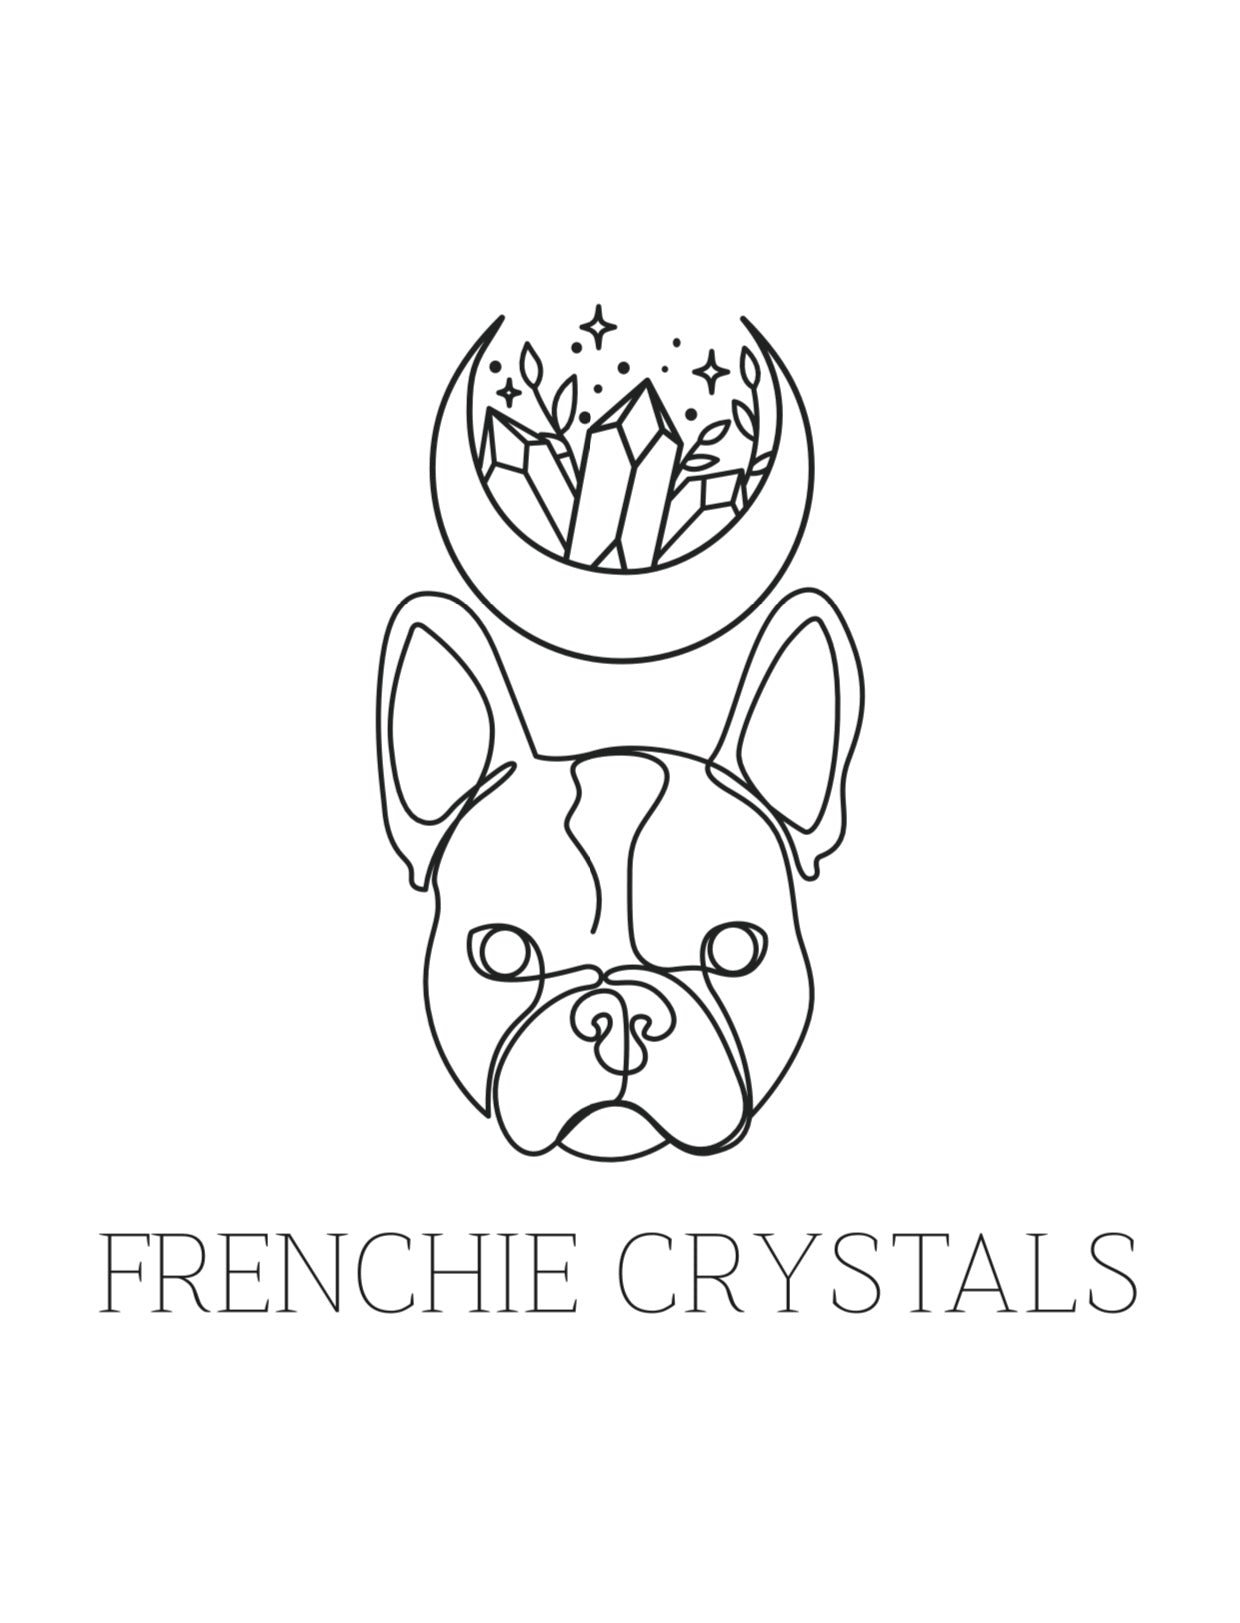 Frenchie Crystals